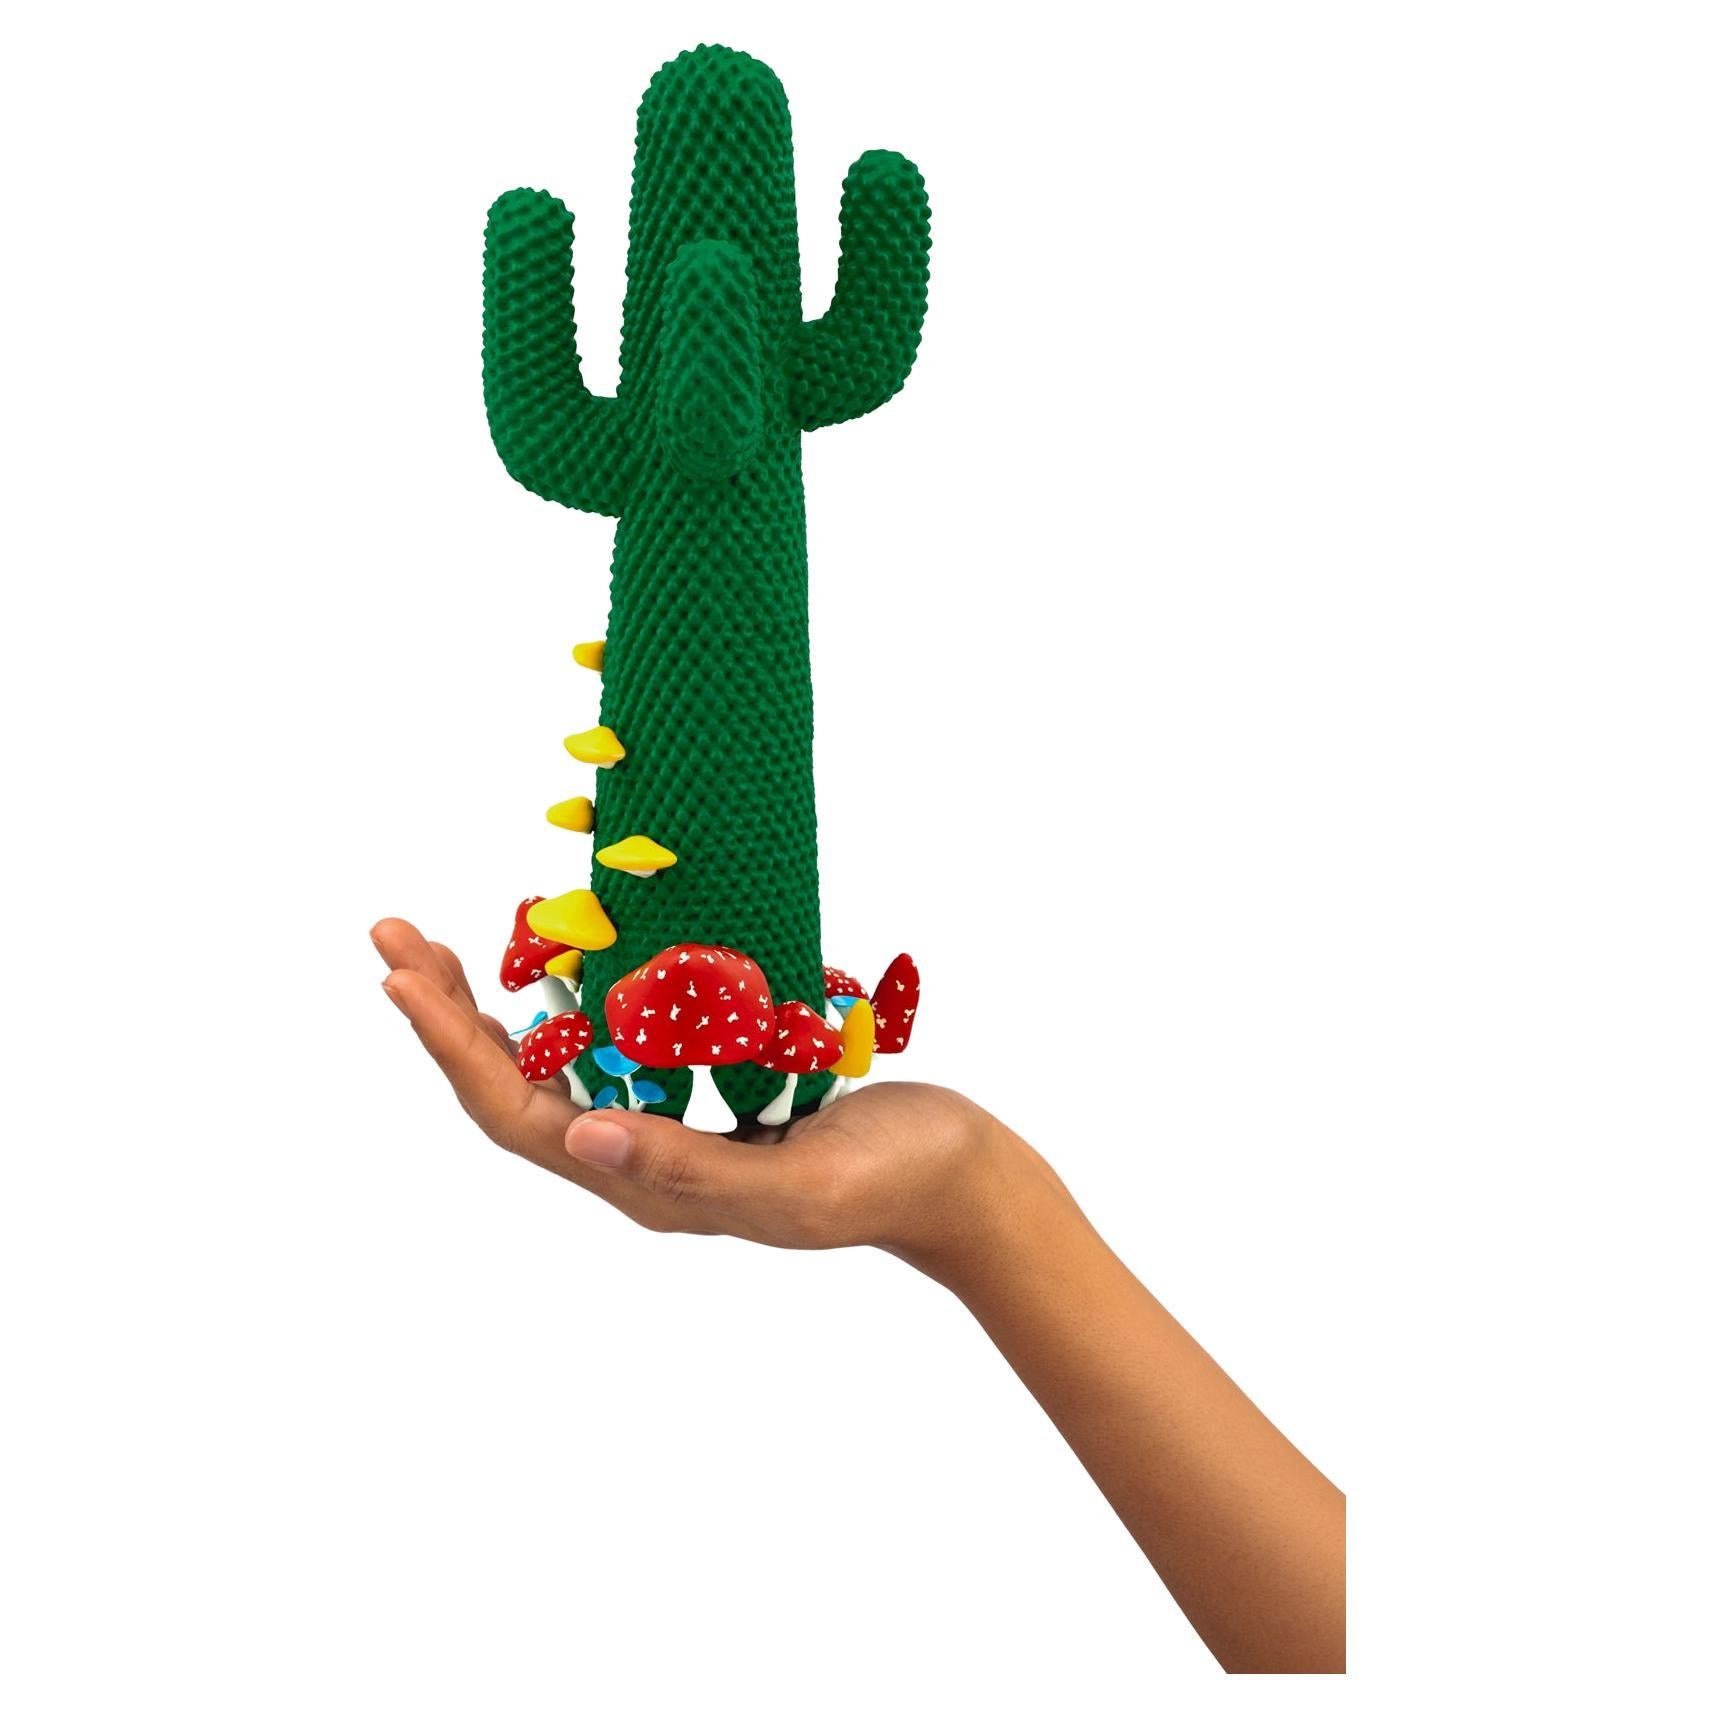 LIMITED EDITION #89/99

Gufram presents the miniaturised version of the Shroom CACTUS® created in collaboration with A$AP Rocky and the artist’s new design studio HOMMEMADE Exactly as the real-size Shroom CACTUS®, the new Guframini piece features